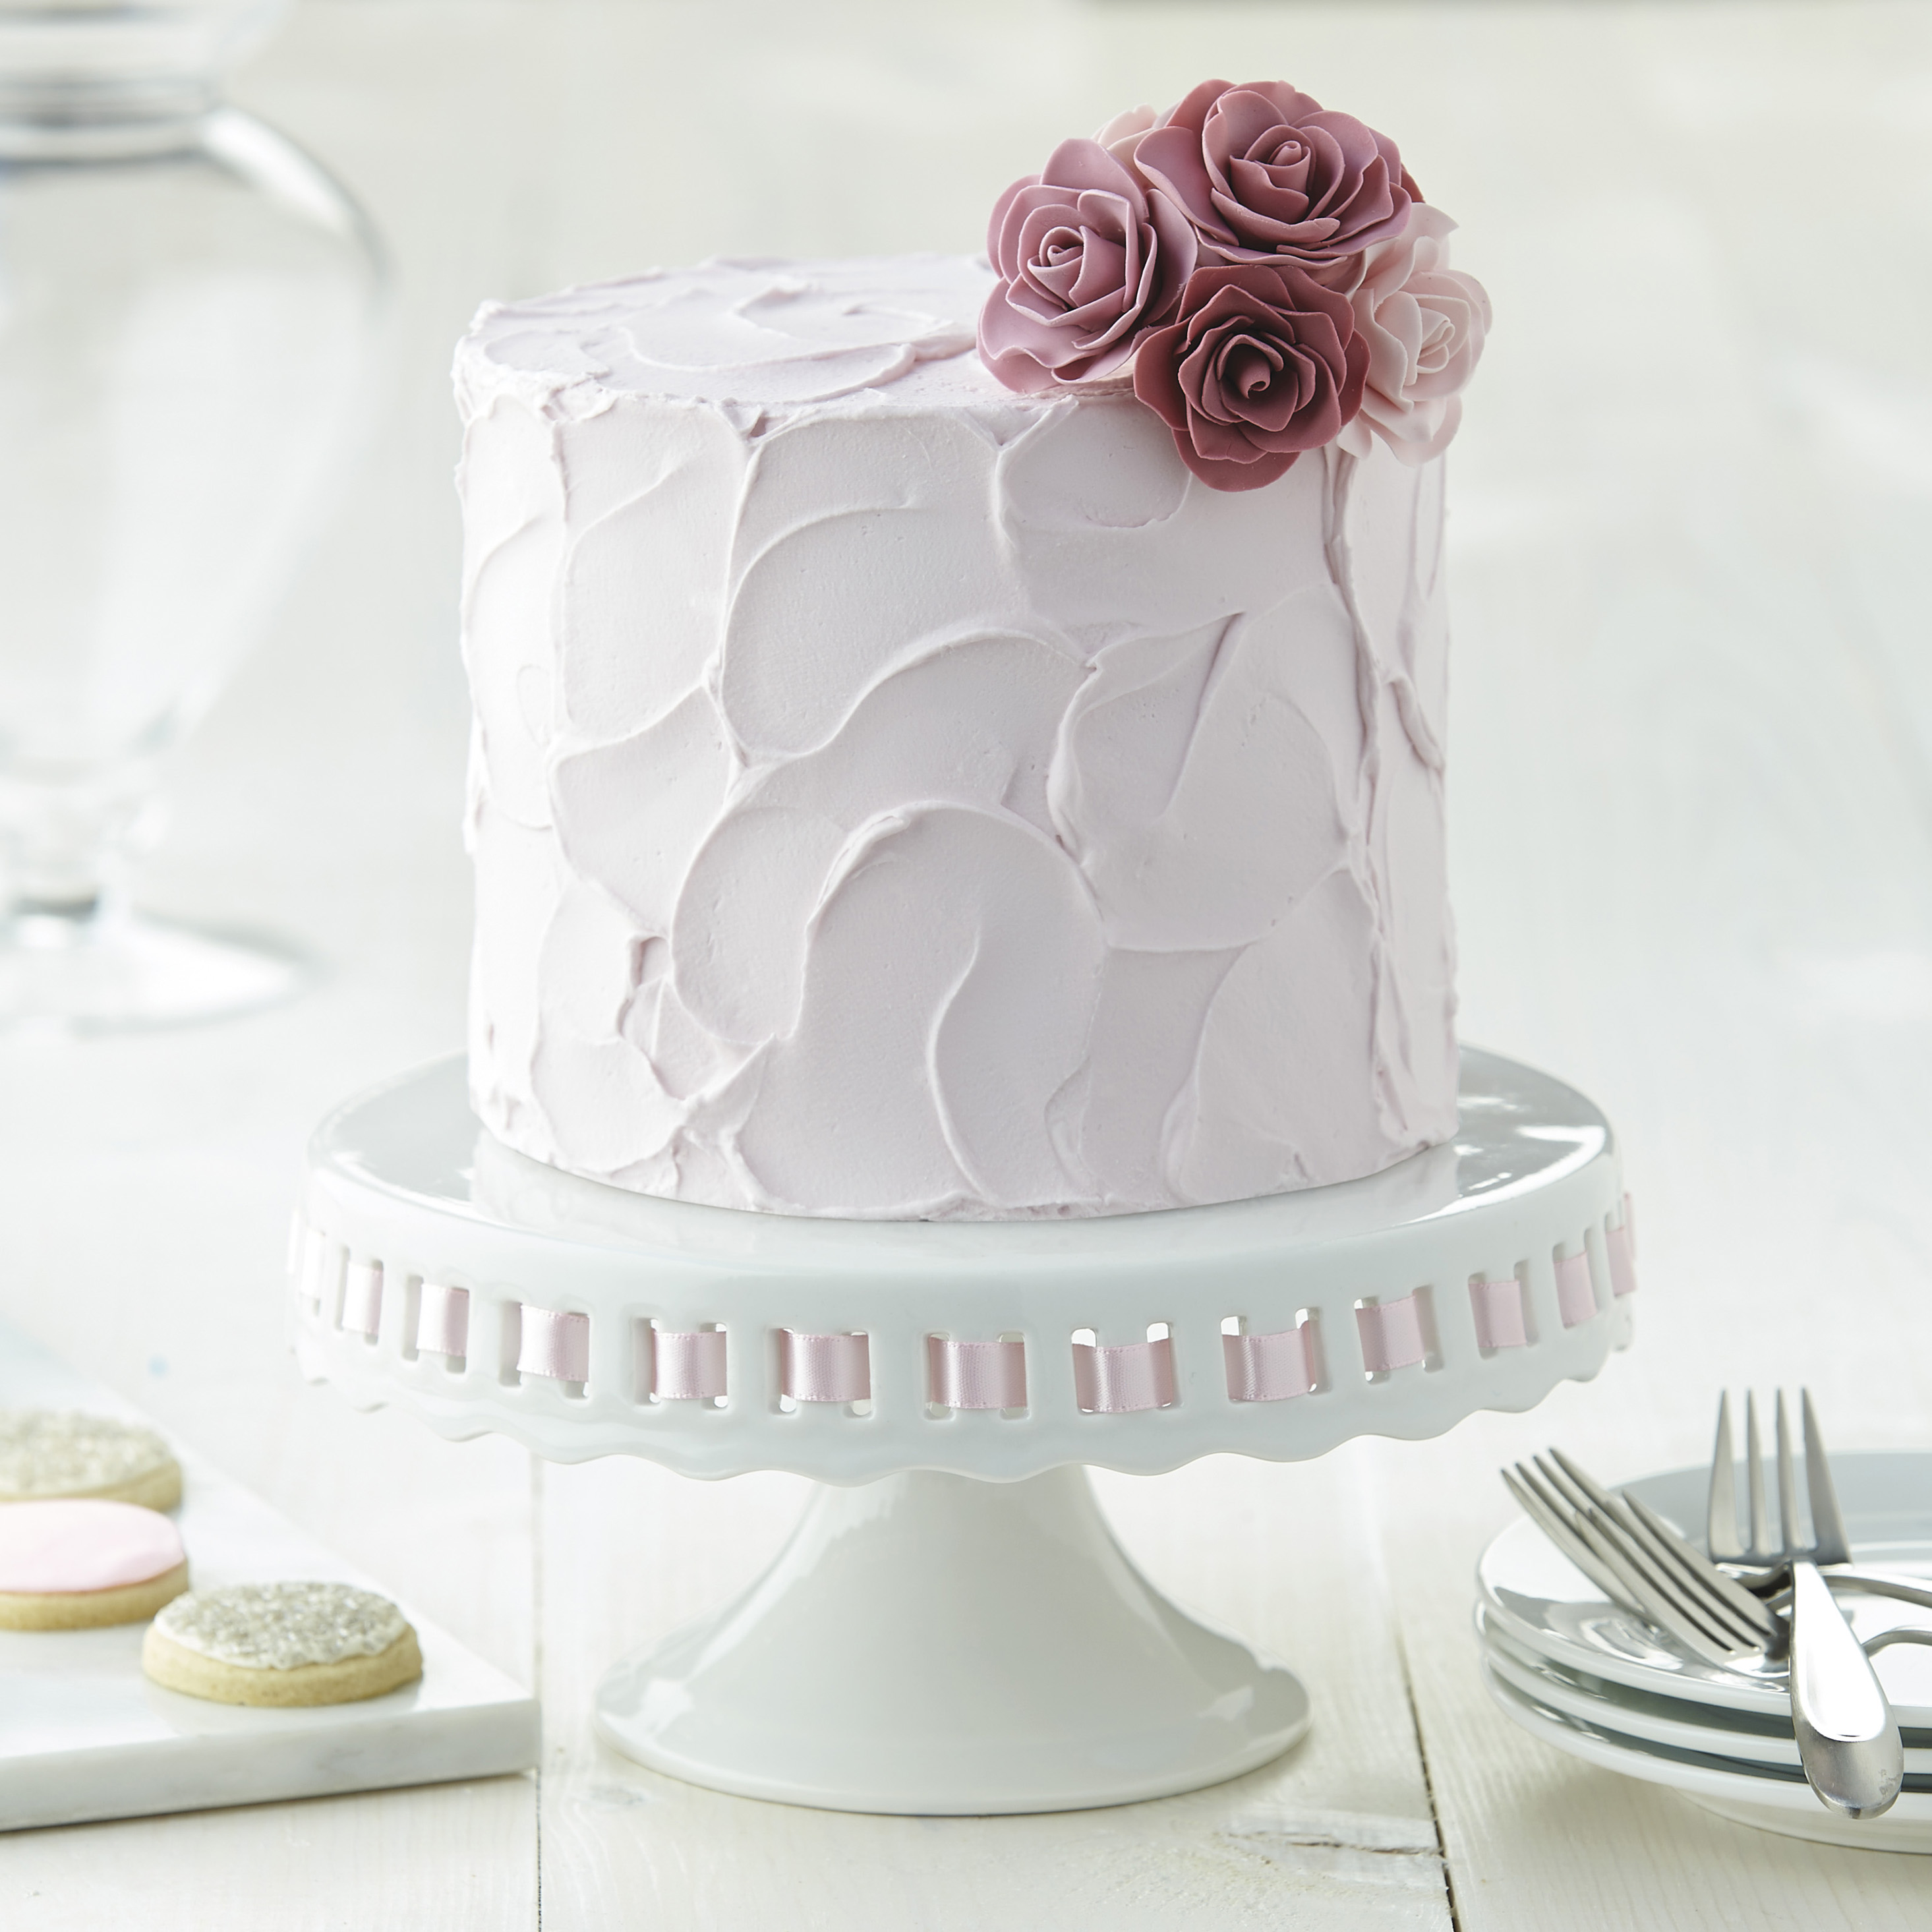 The Wilton Method of Cake Decorating ® Course 2: Flowers and Cake Design.